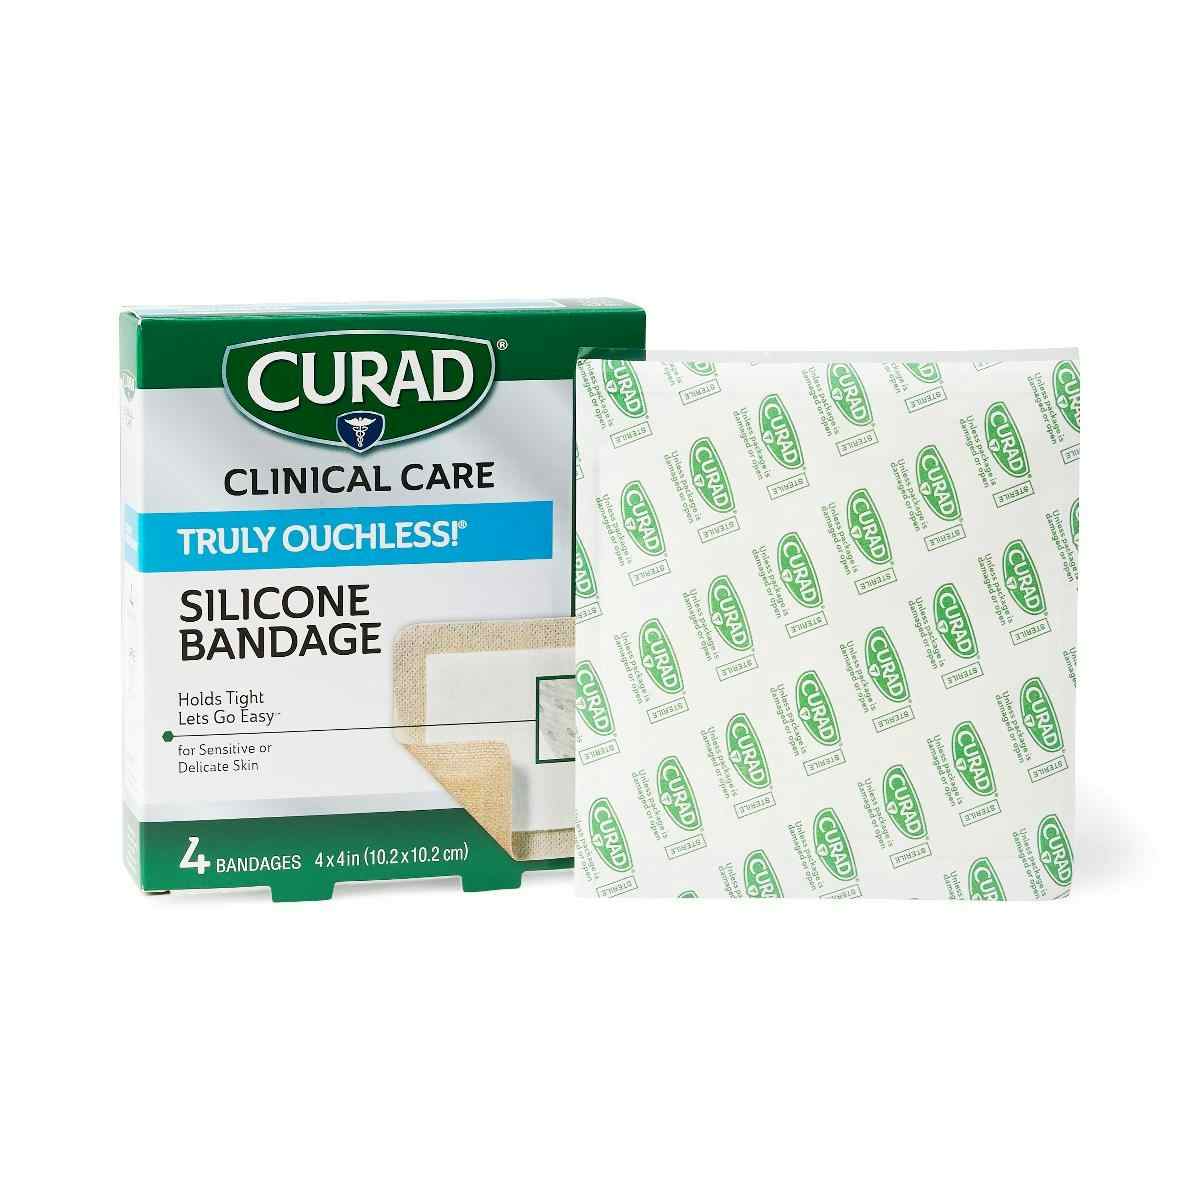 Curad Truly Ouchless Silicone Bandages, CUR5001V1, 4" X 4" - Case of 24